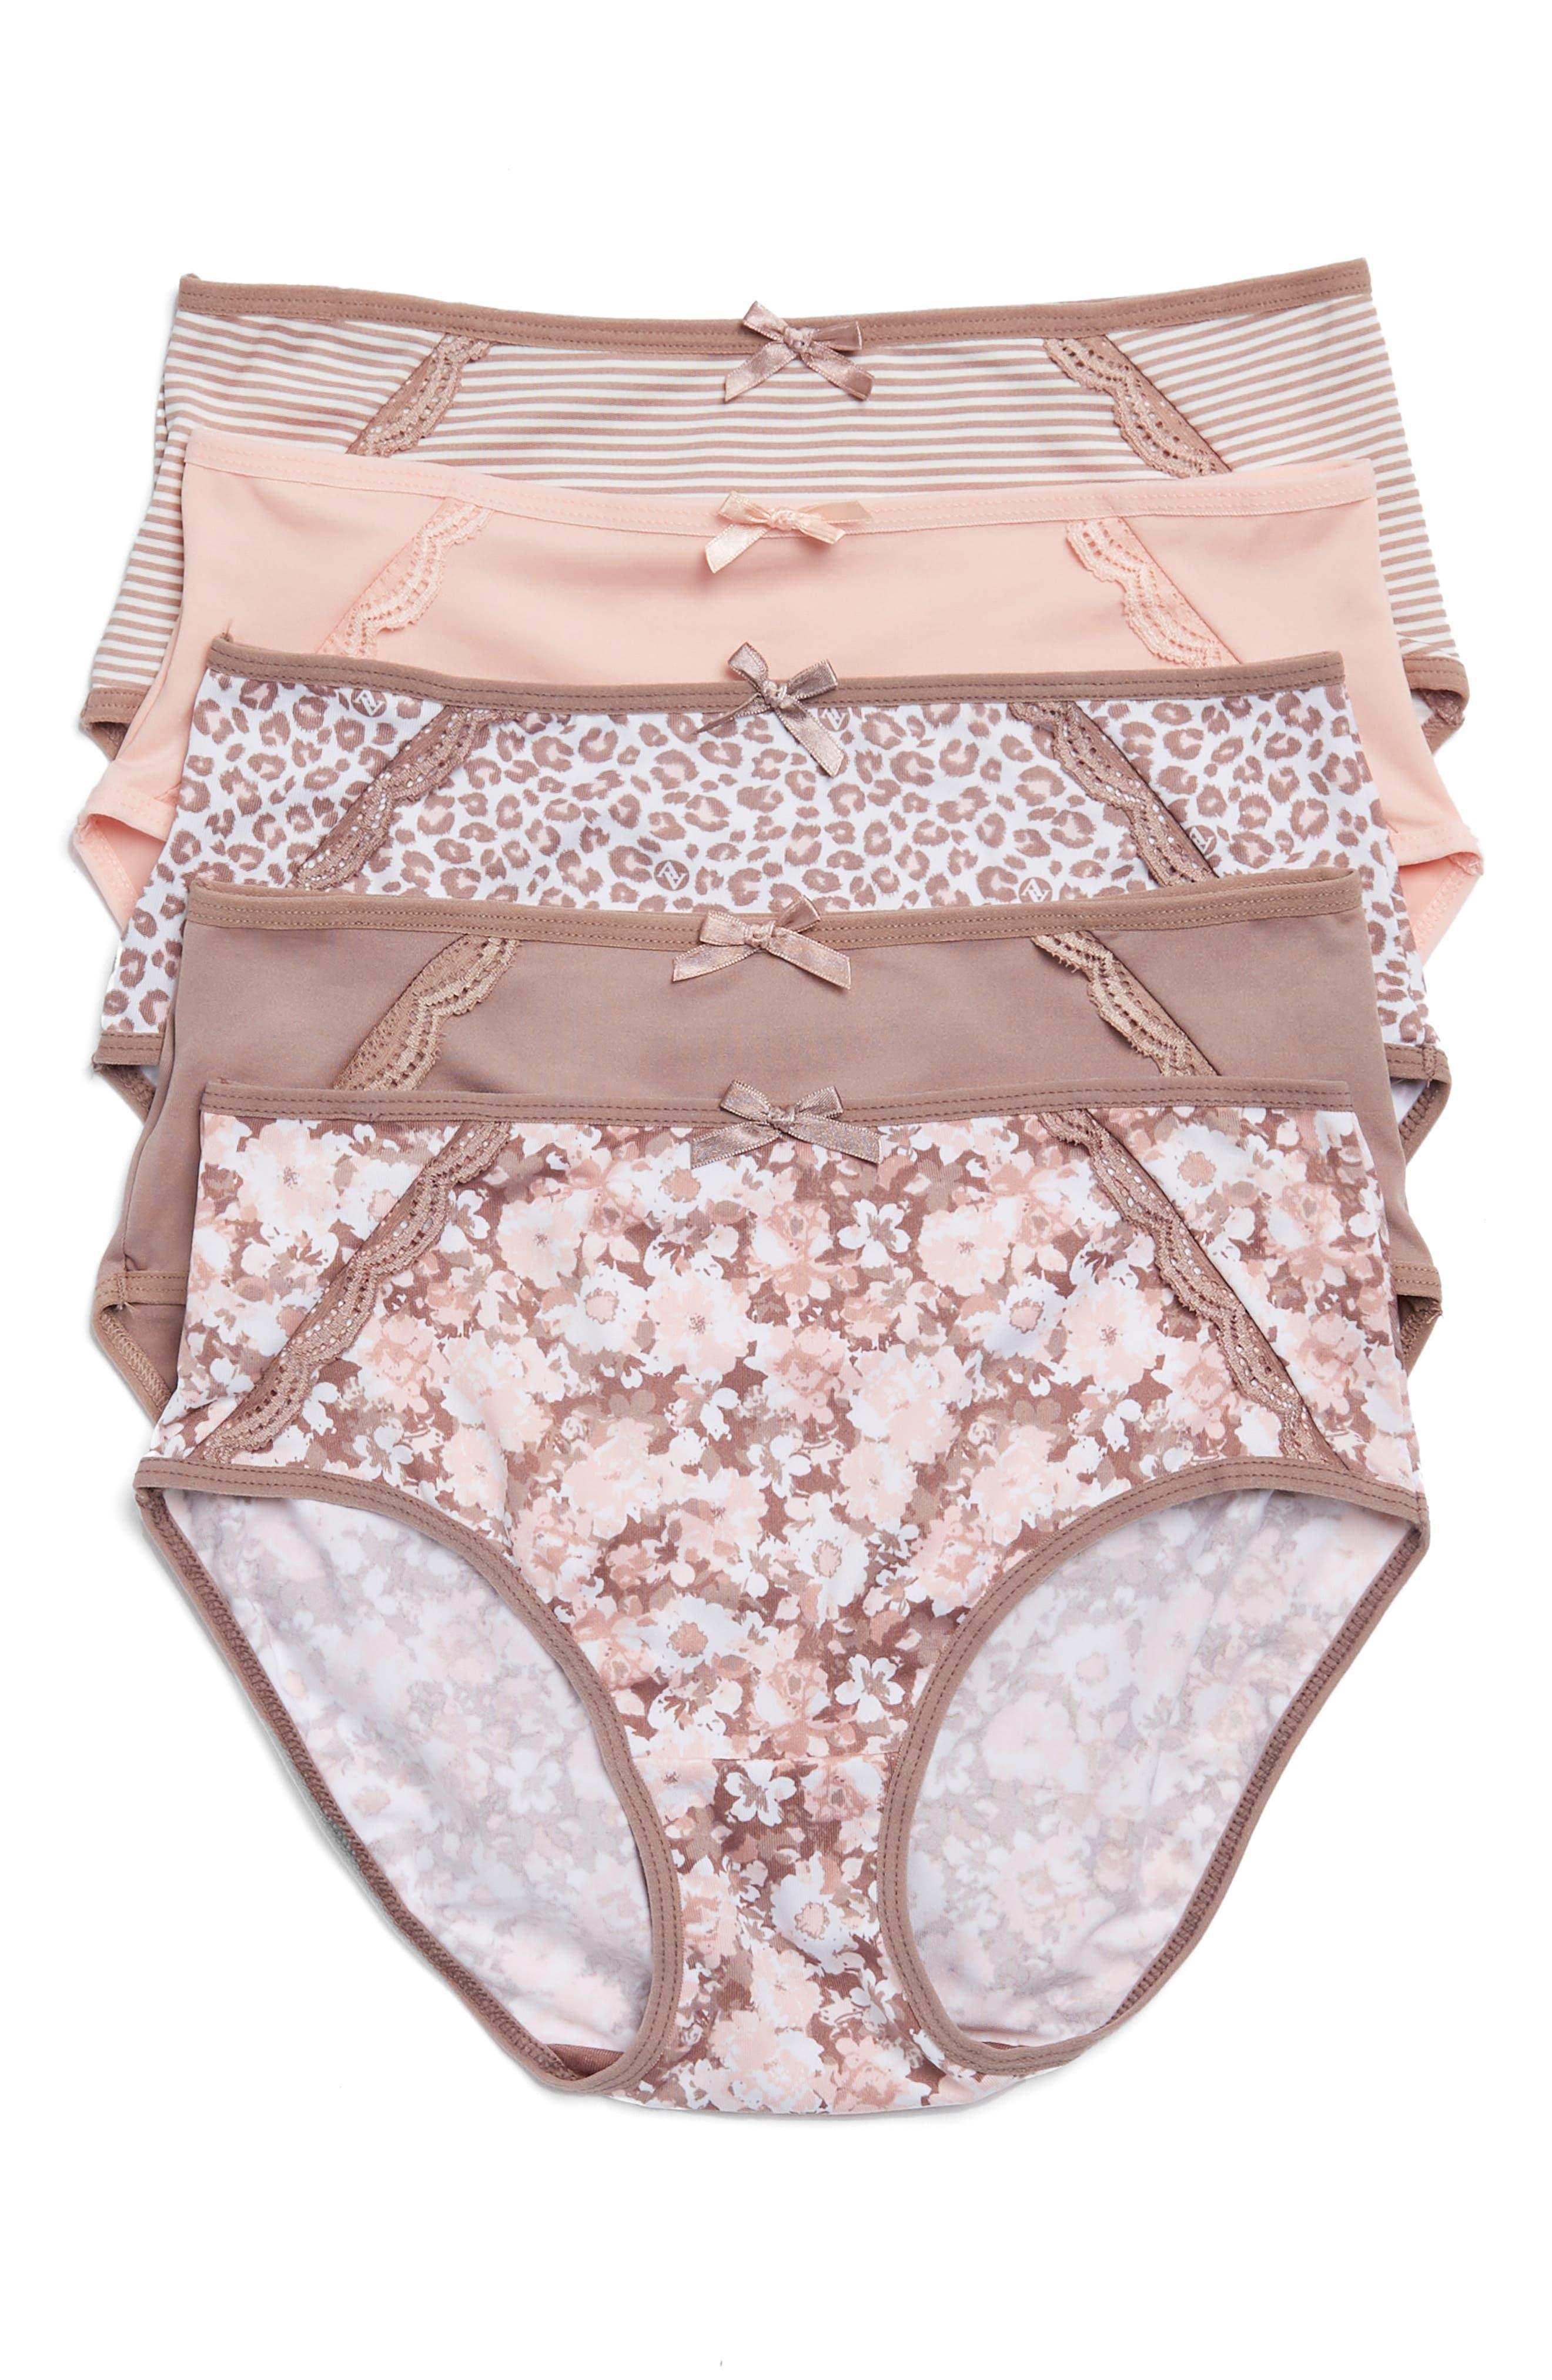 Adrienne Vittadini Everyday Lace Full Briefs in Pink